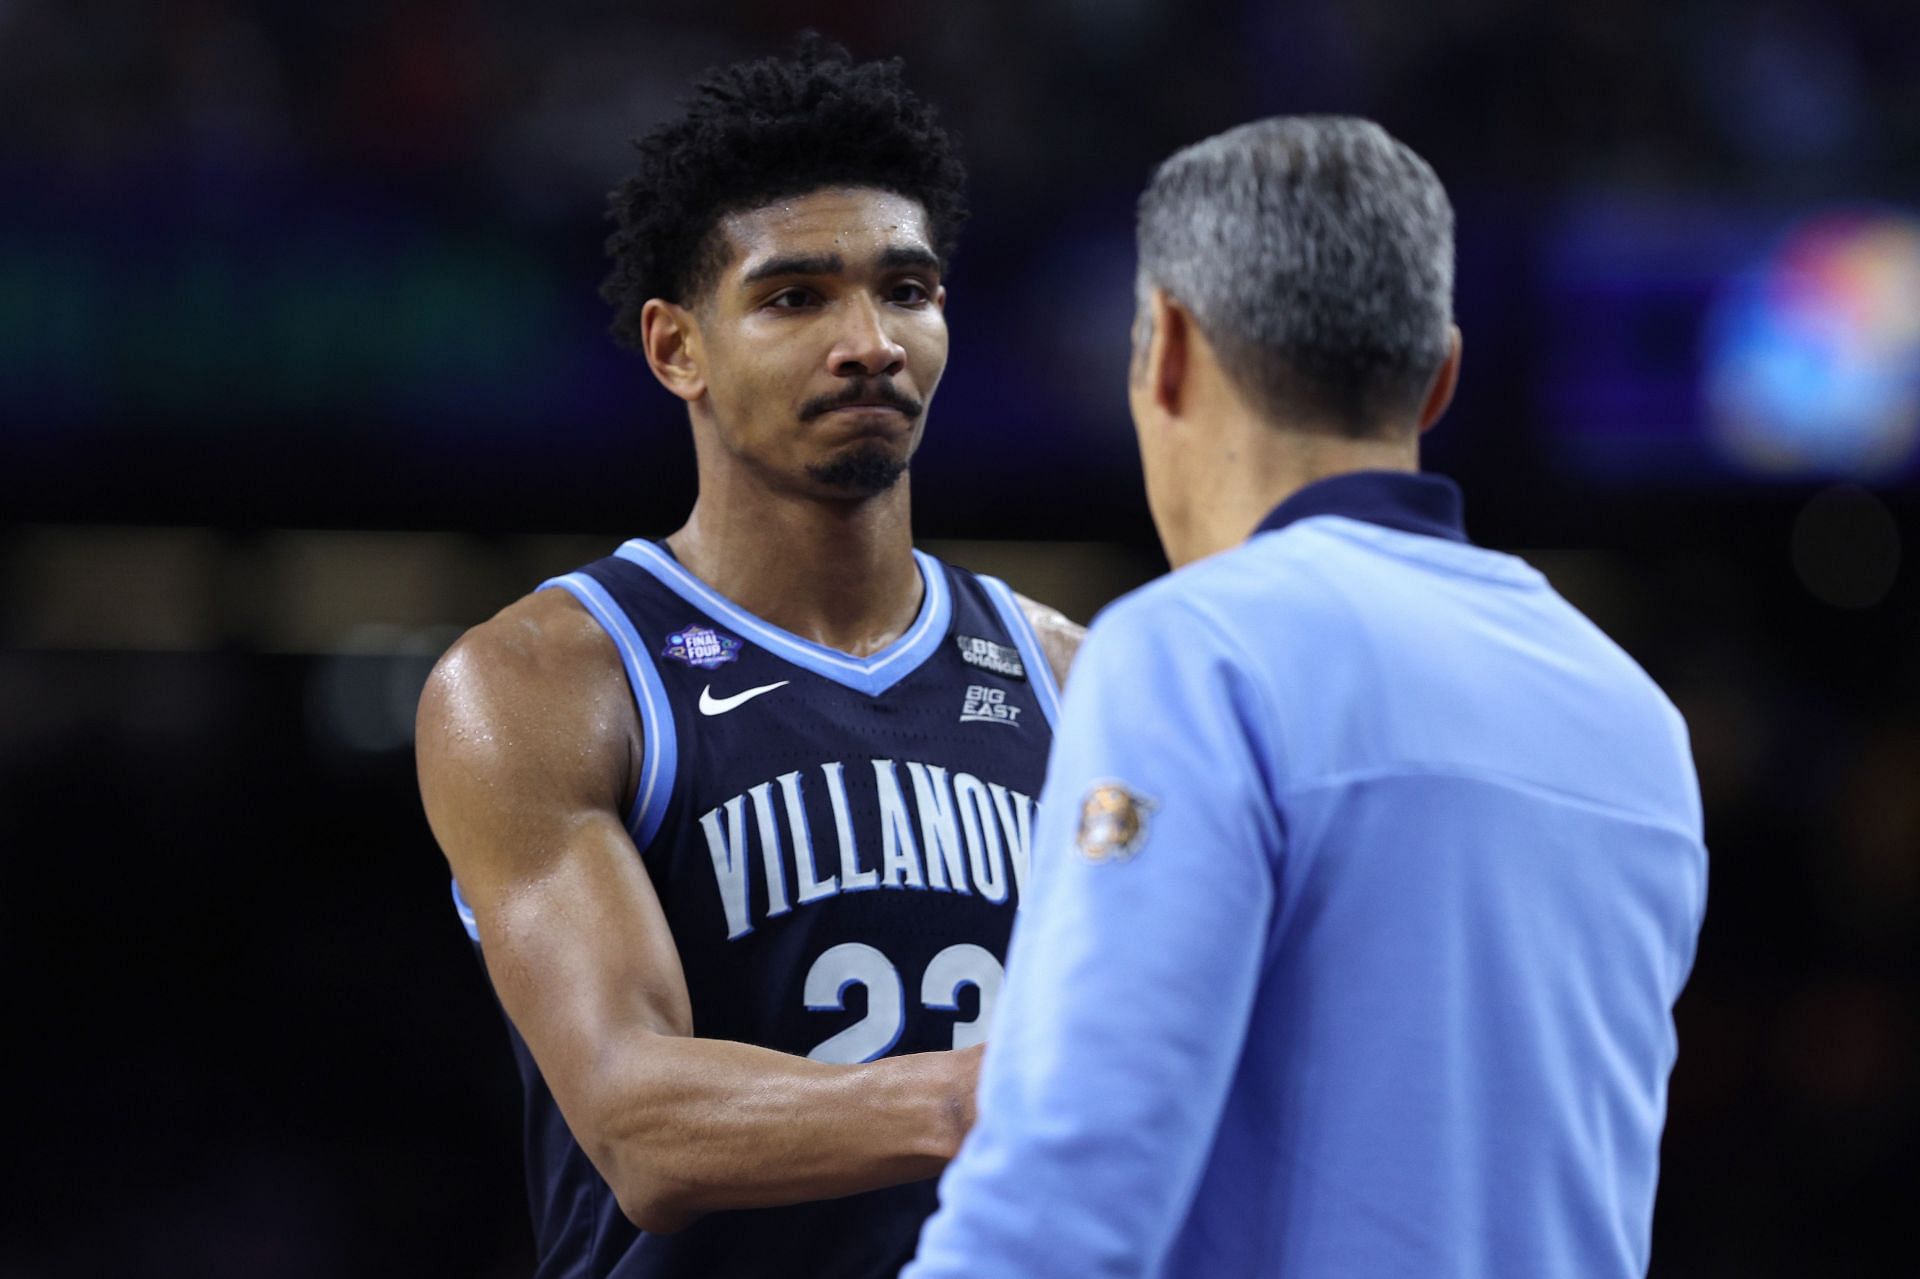 Jay Wright has been able to impact his players in a way vital to college basketball.